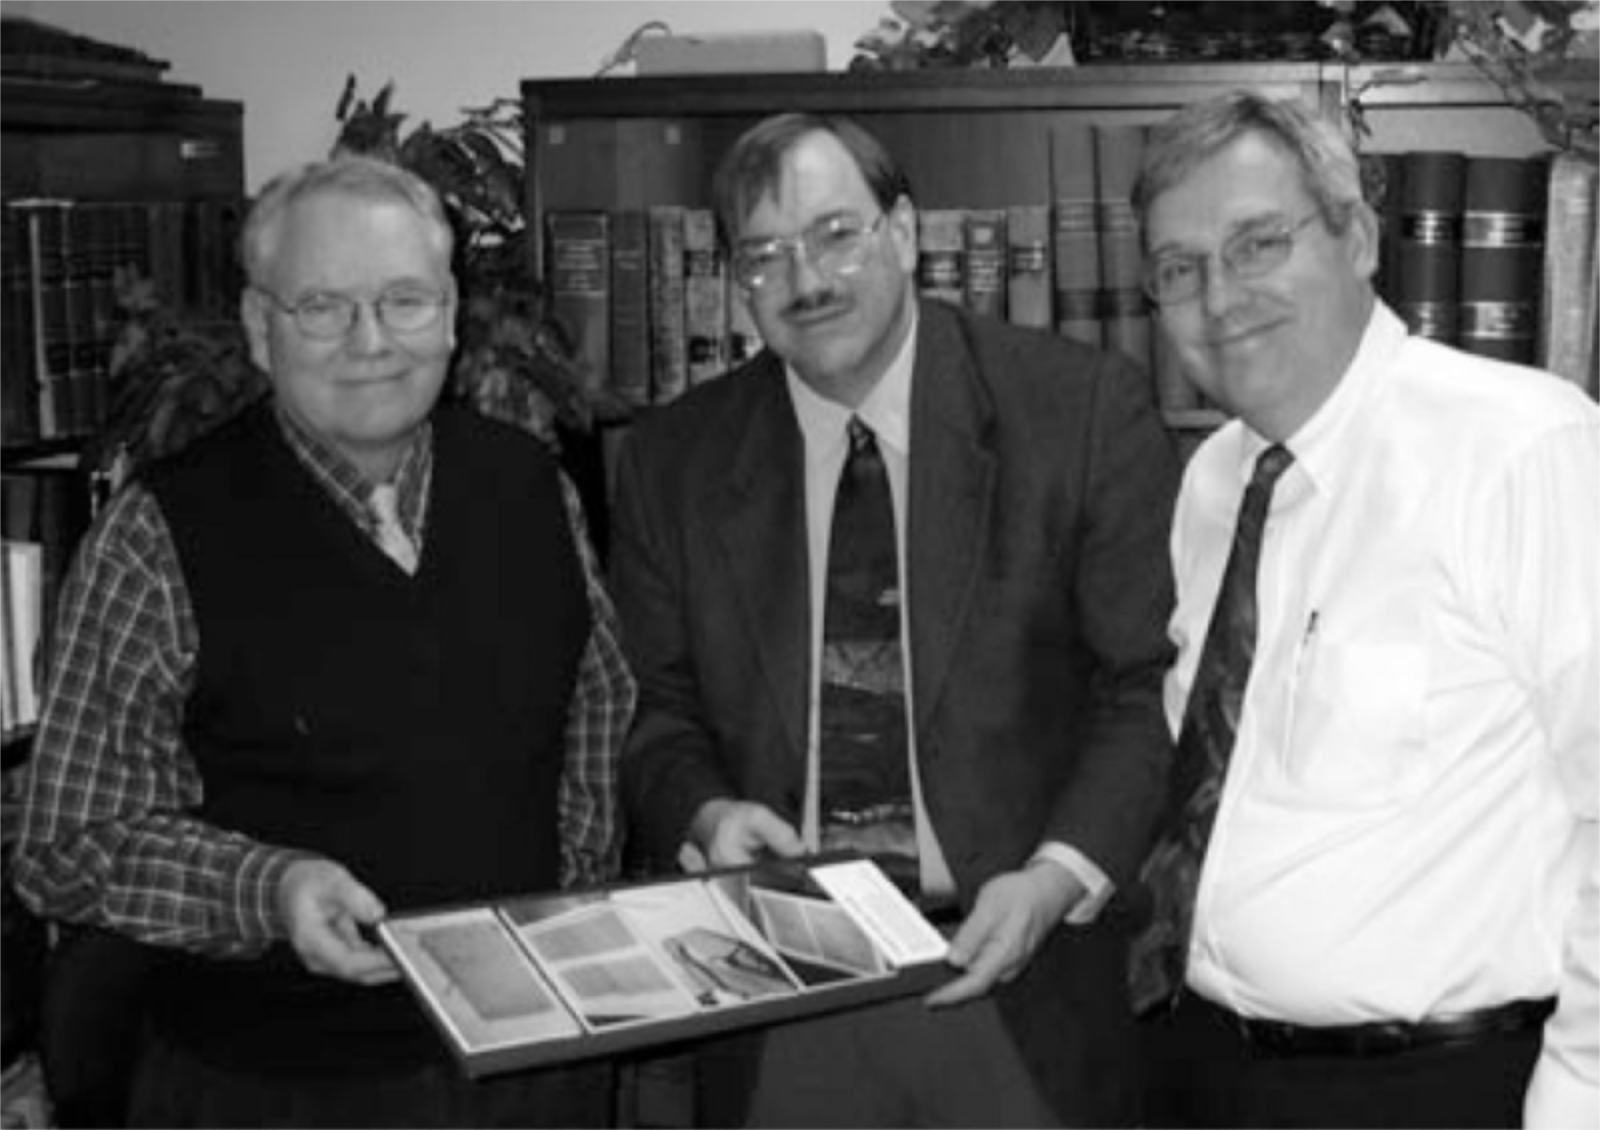 Ray L Huntington (left) and Brian M. Hauglid (right) visit with Ronald E. Romig (center)